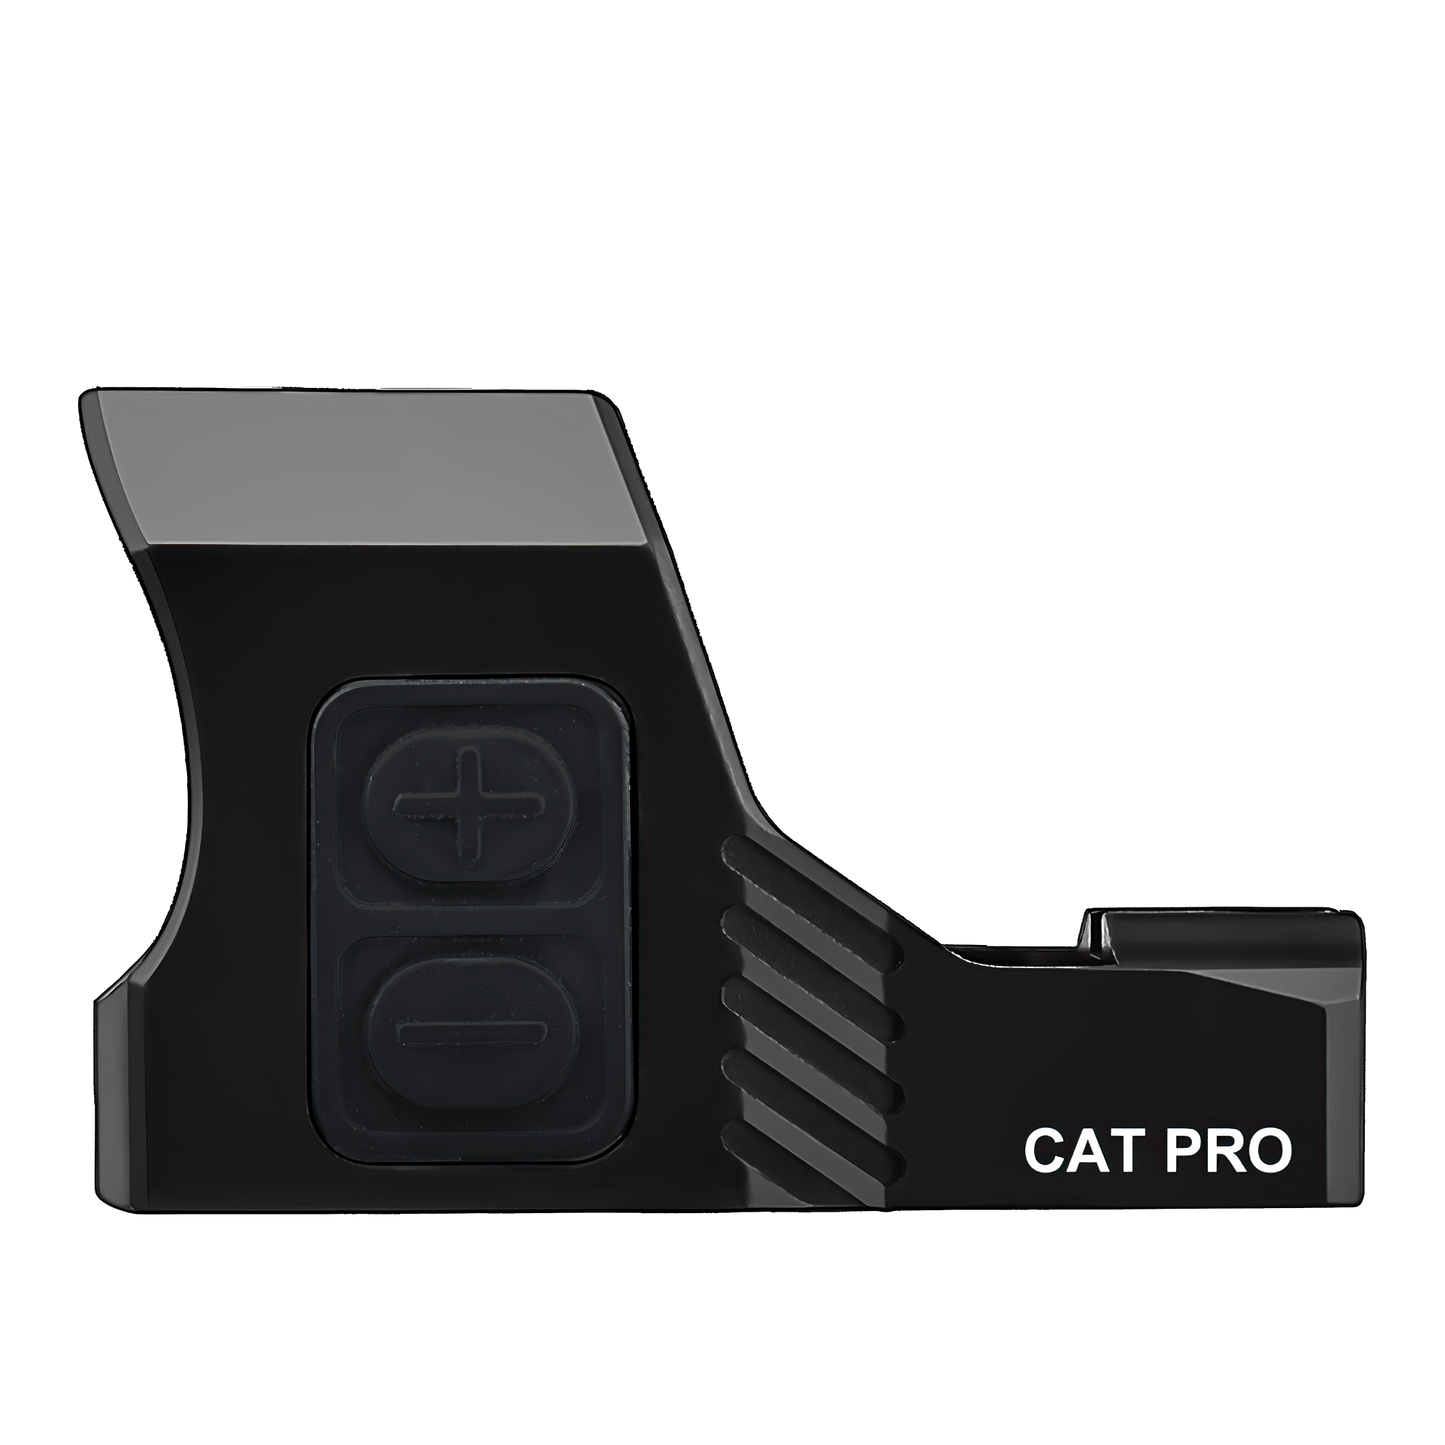 Cyelee CAT PRO Duty & Carry Ready RMSc Micro Red Dot with Motion Deactivated Standby